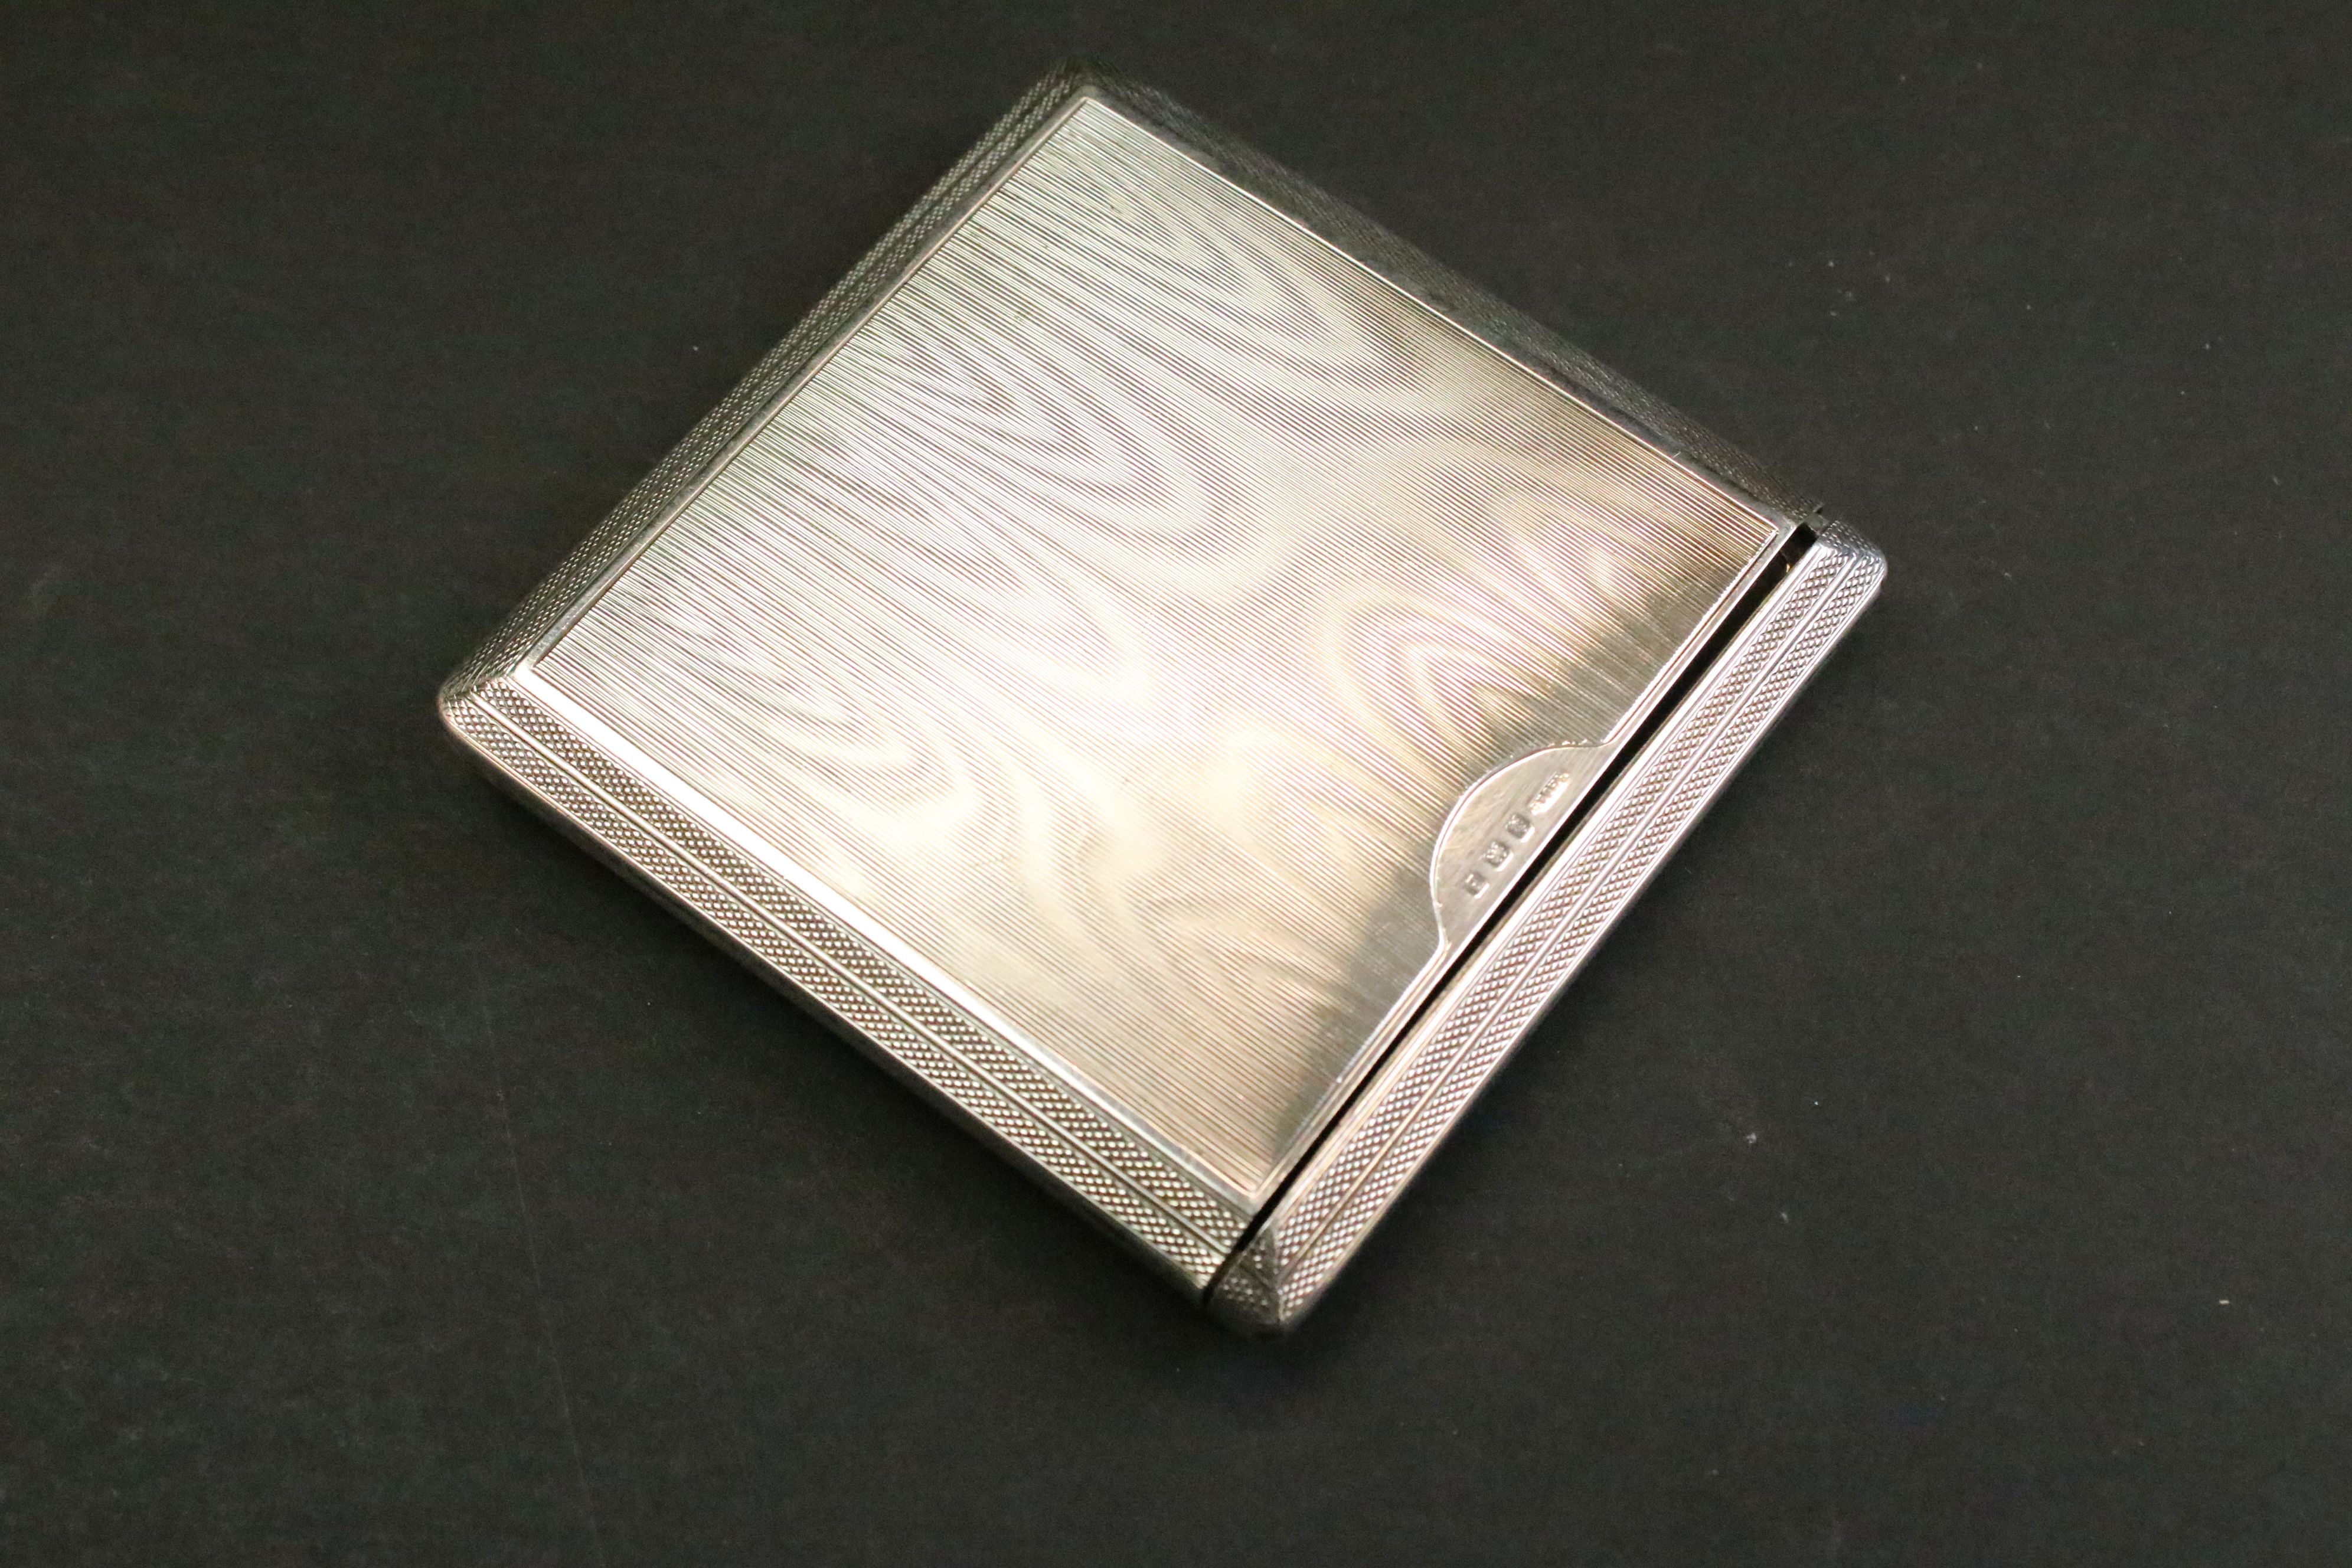 Square silver cheroot case, engine turned decoration, makers R H Jones & Sons, Birmingham 1926, - Image 2 of 4